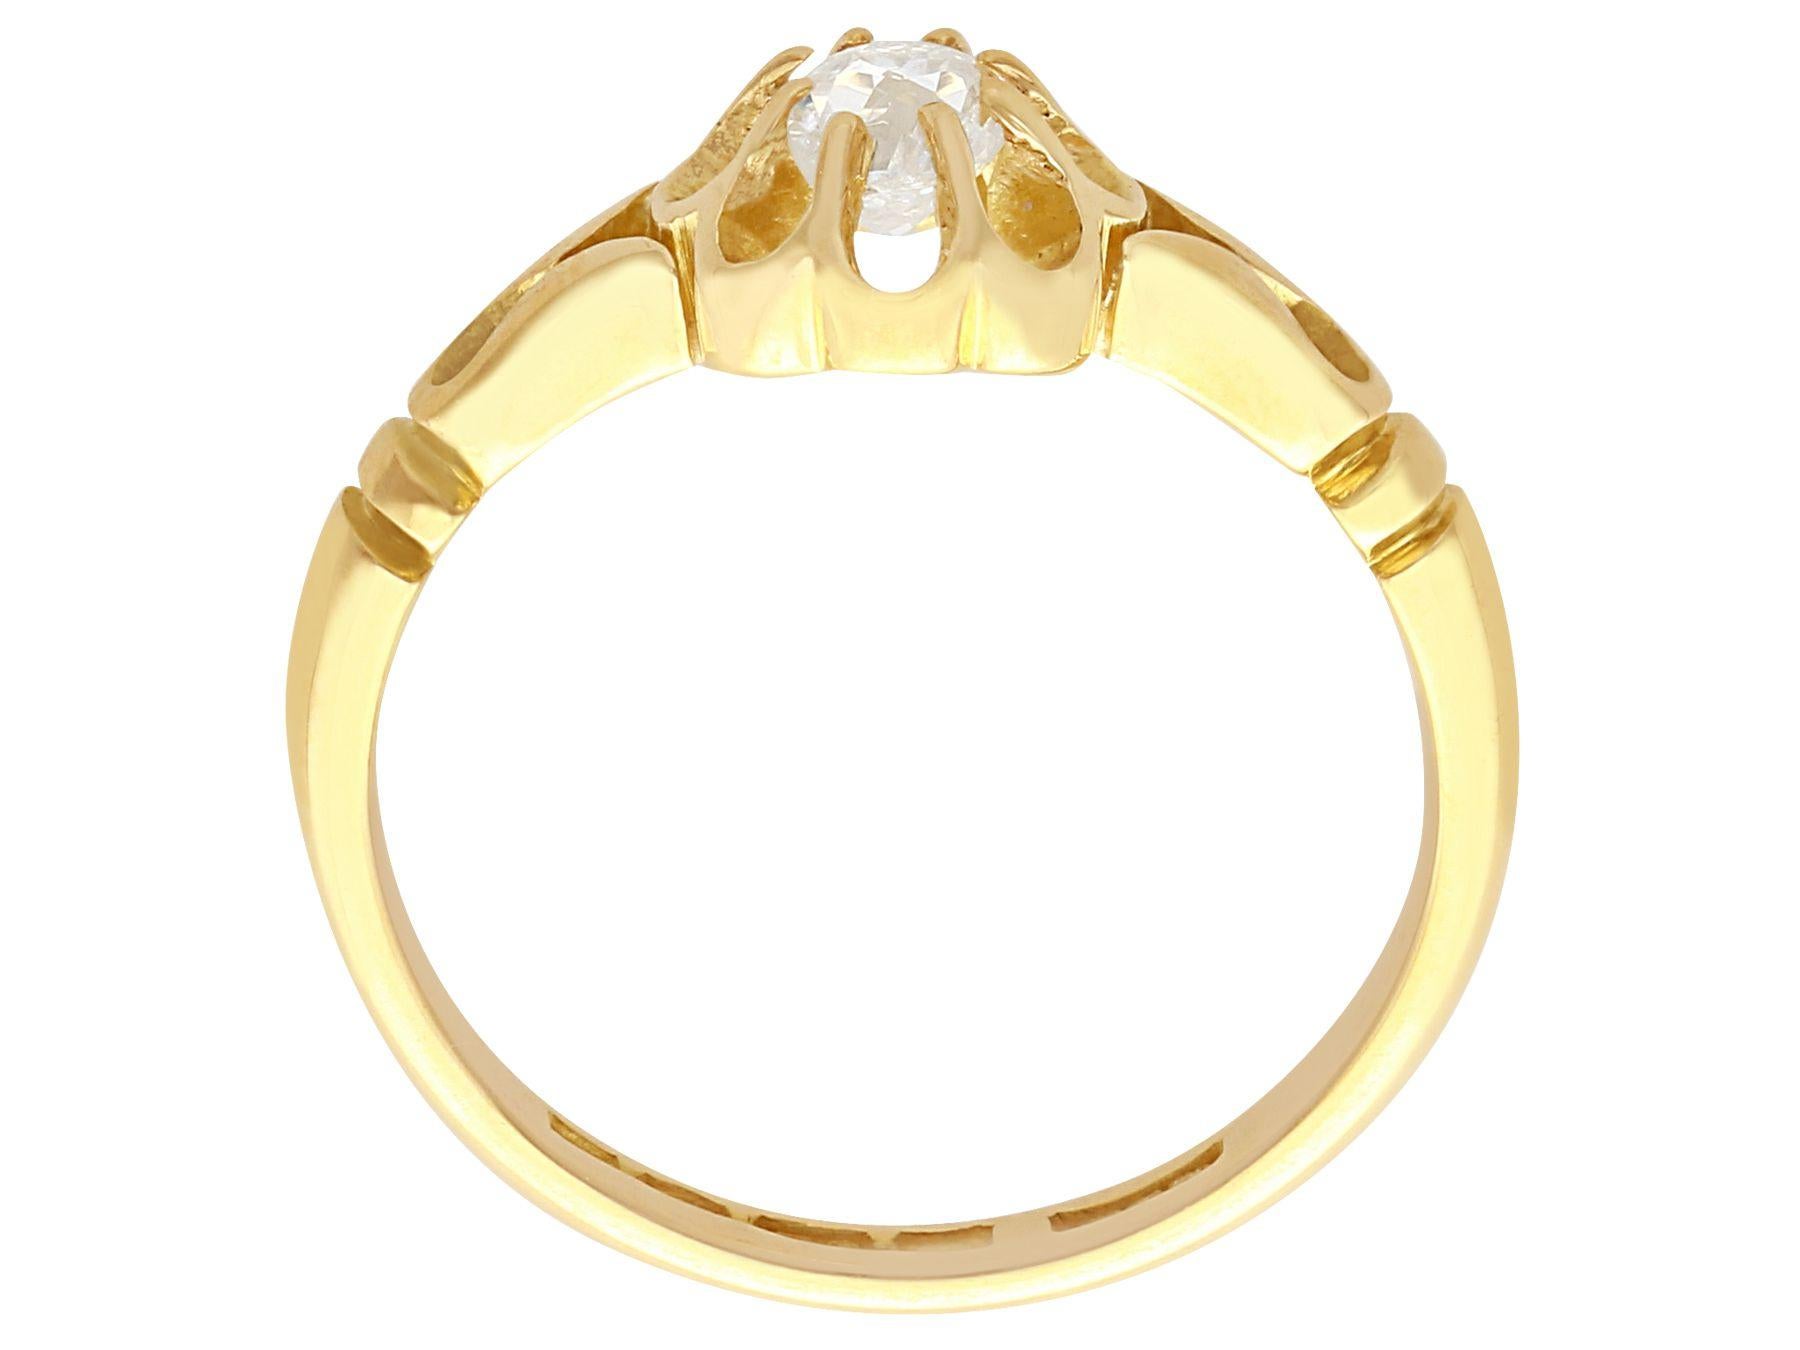 Antique Diamond 18K Yellow Gold Solitaire Ring In Excellent Condition For Sale In Jesmond, Newcastle Upon Tyne